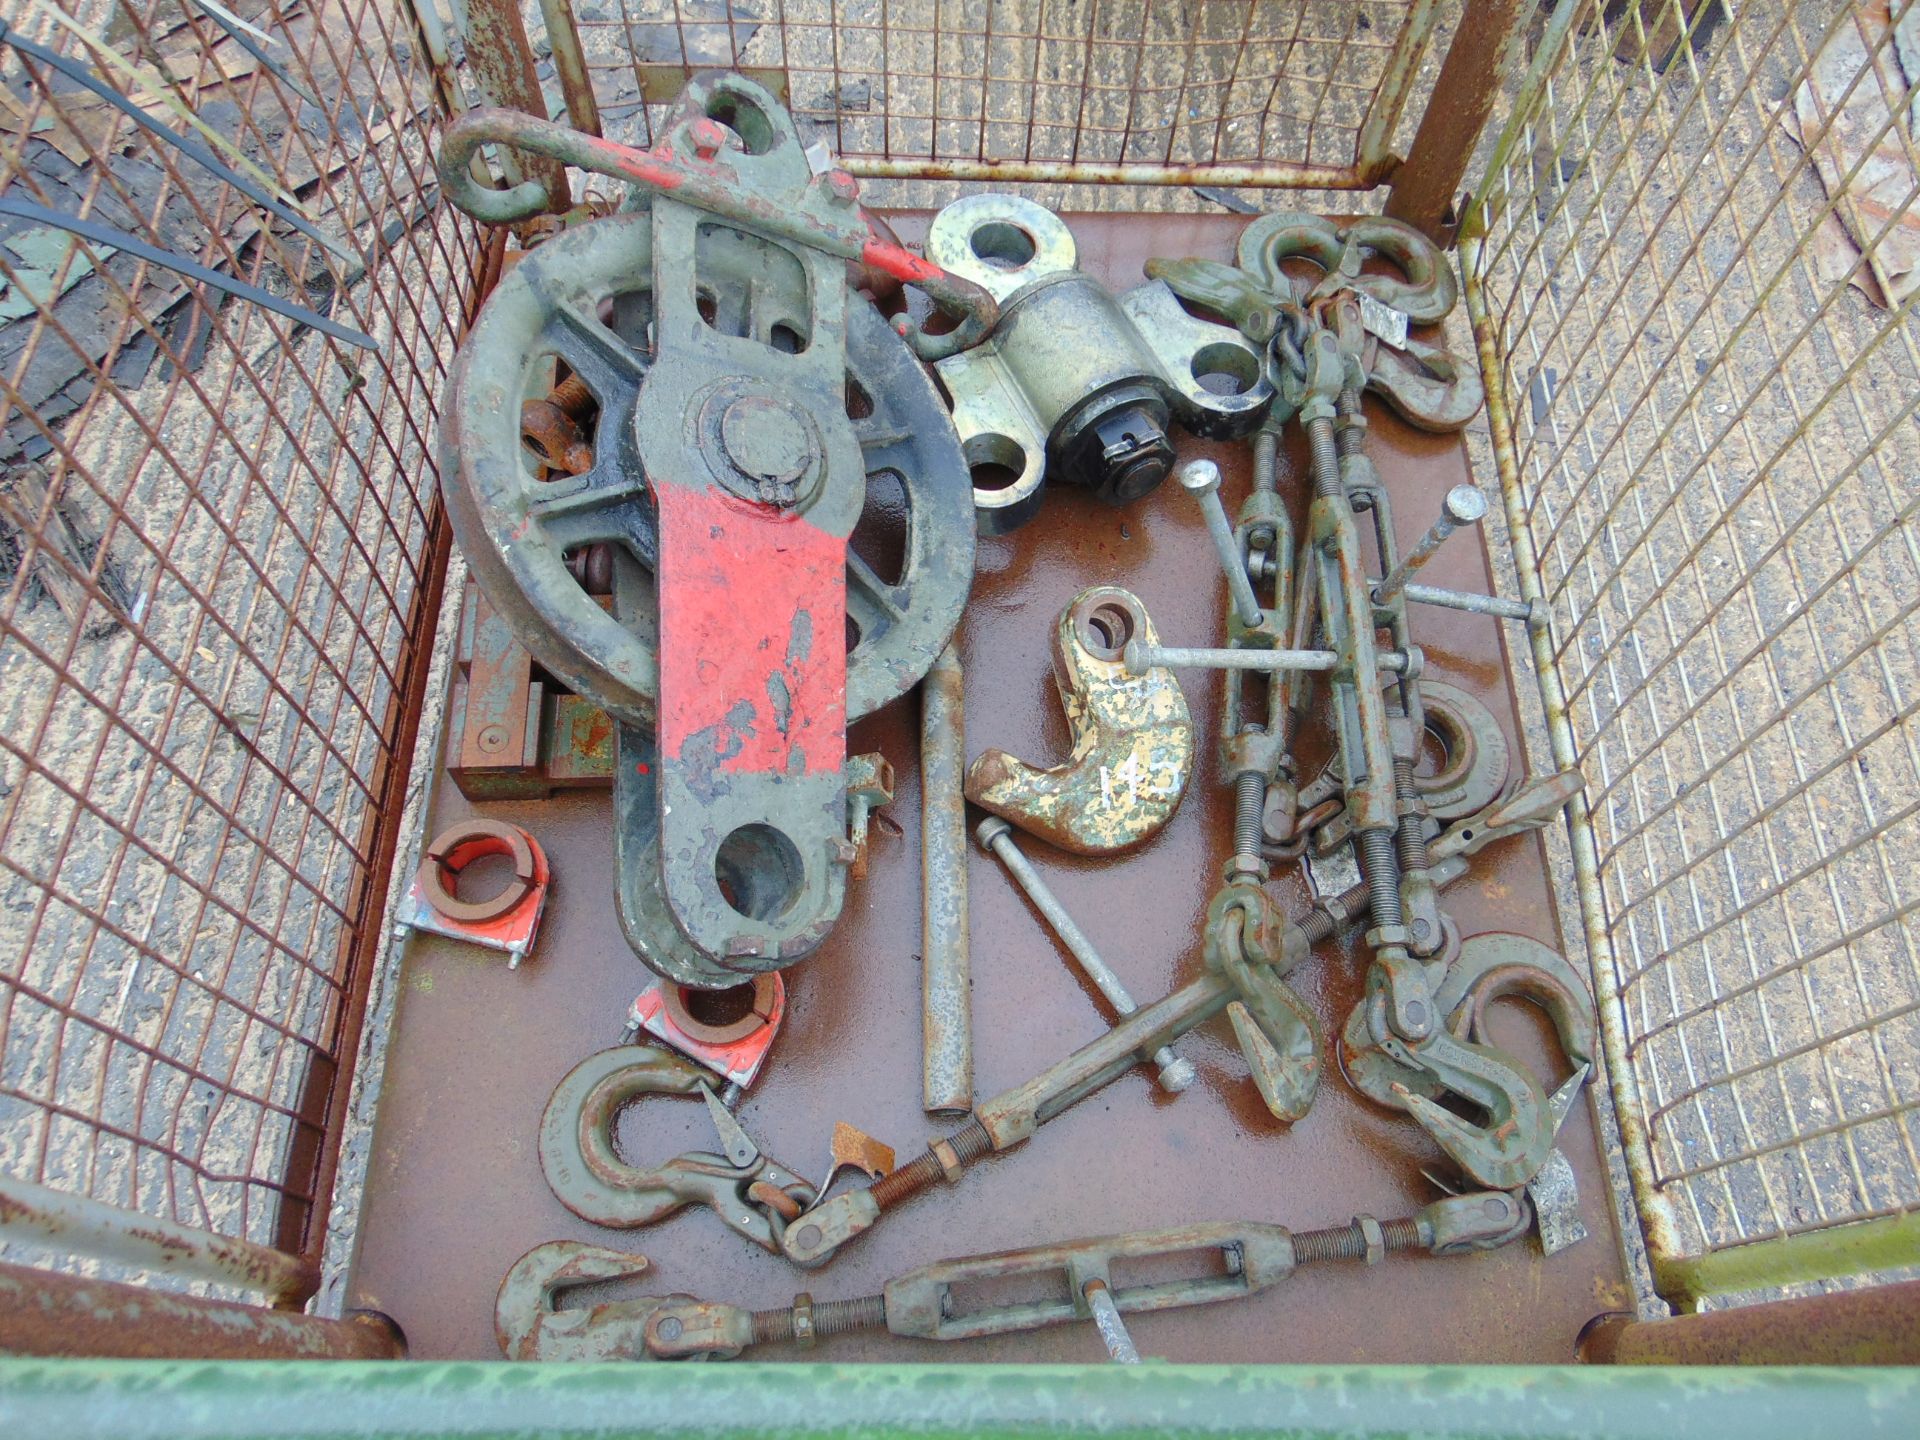 RECOVERY EQUIPMENT INCLUDING SNATCH BLOCK, SHACKLES, TIE DOWNS ETC